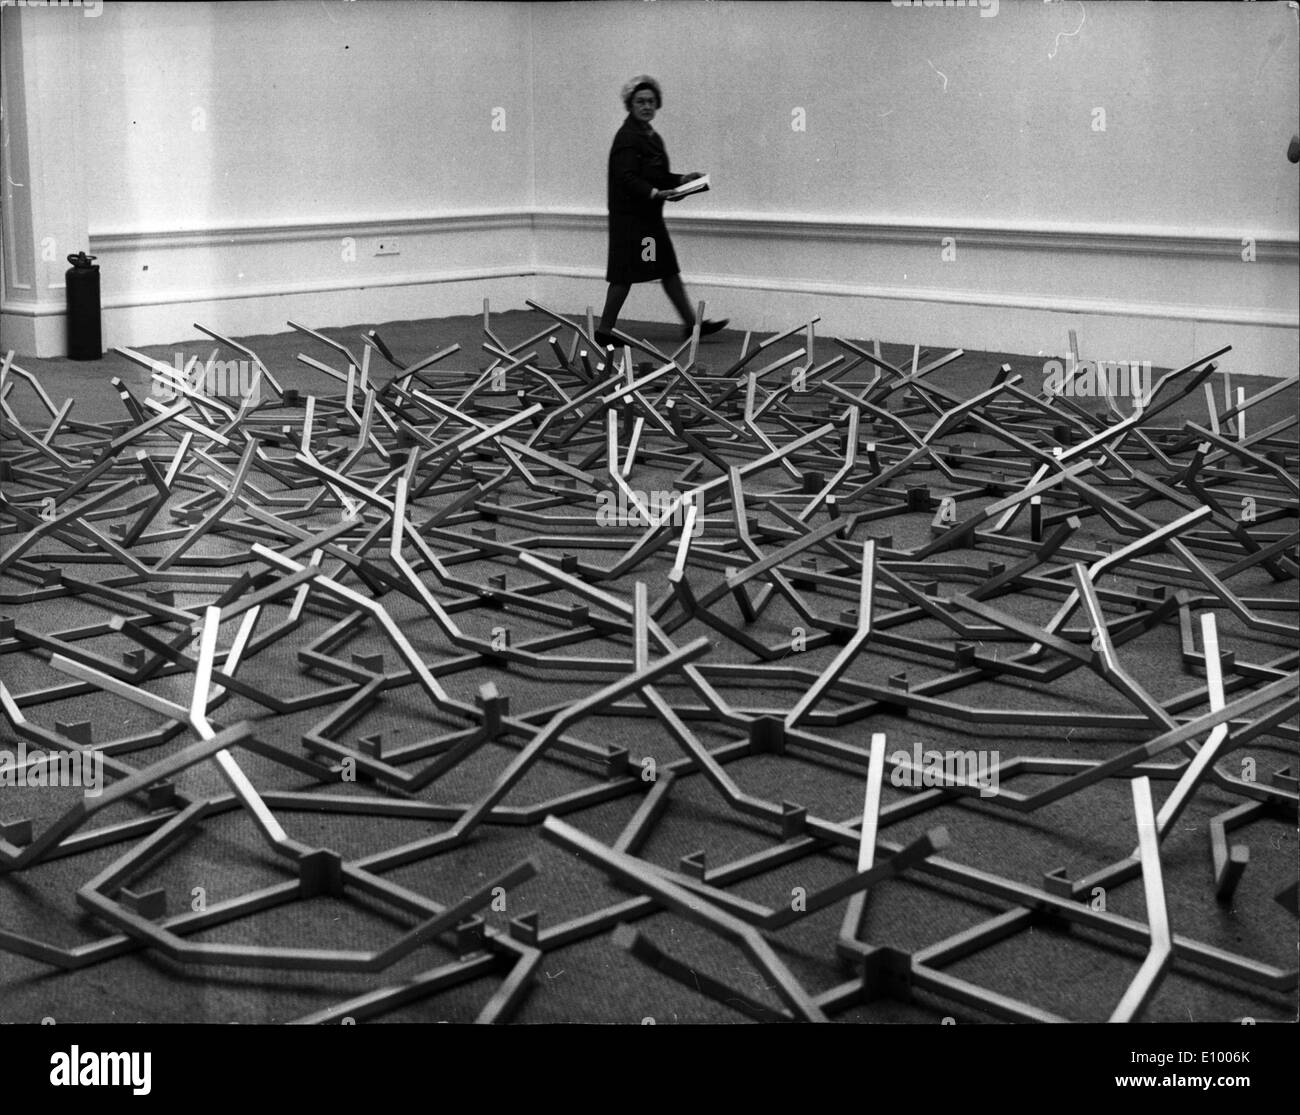 Jan. 01, 1972 - British Sculptors '72 Exhibition At The Royal Academy British Sculptors '72 which is due to open at the Royal Academy represents a major break with the long established traditions of the Large Winter Exhibitions. In the hundred years since the Royal Academy came to Burlington House and these famous shows began, they have almost invariably been works of art loaned for the occasion. Now, for the first time, the exhibition will be devoted entirely to one important aspect of contemporary art - the work of 24 living British sculptors Stock Photo